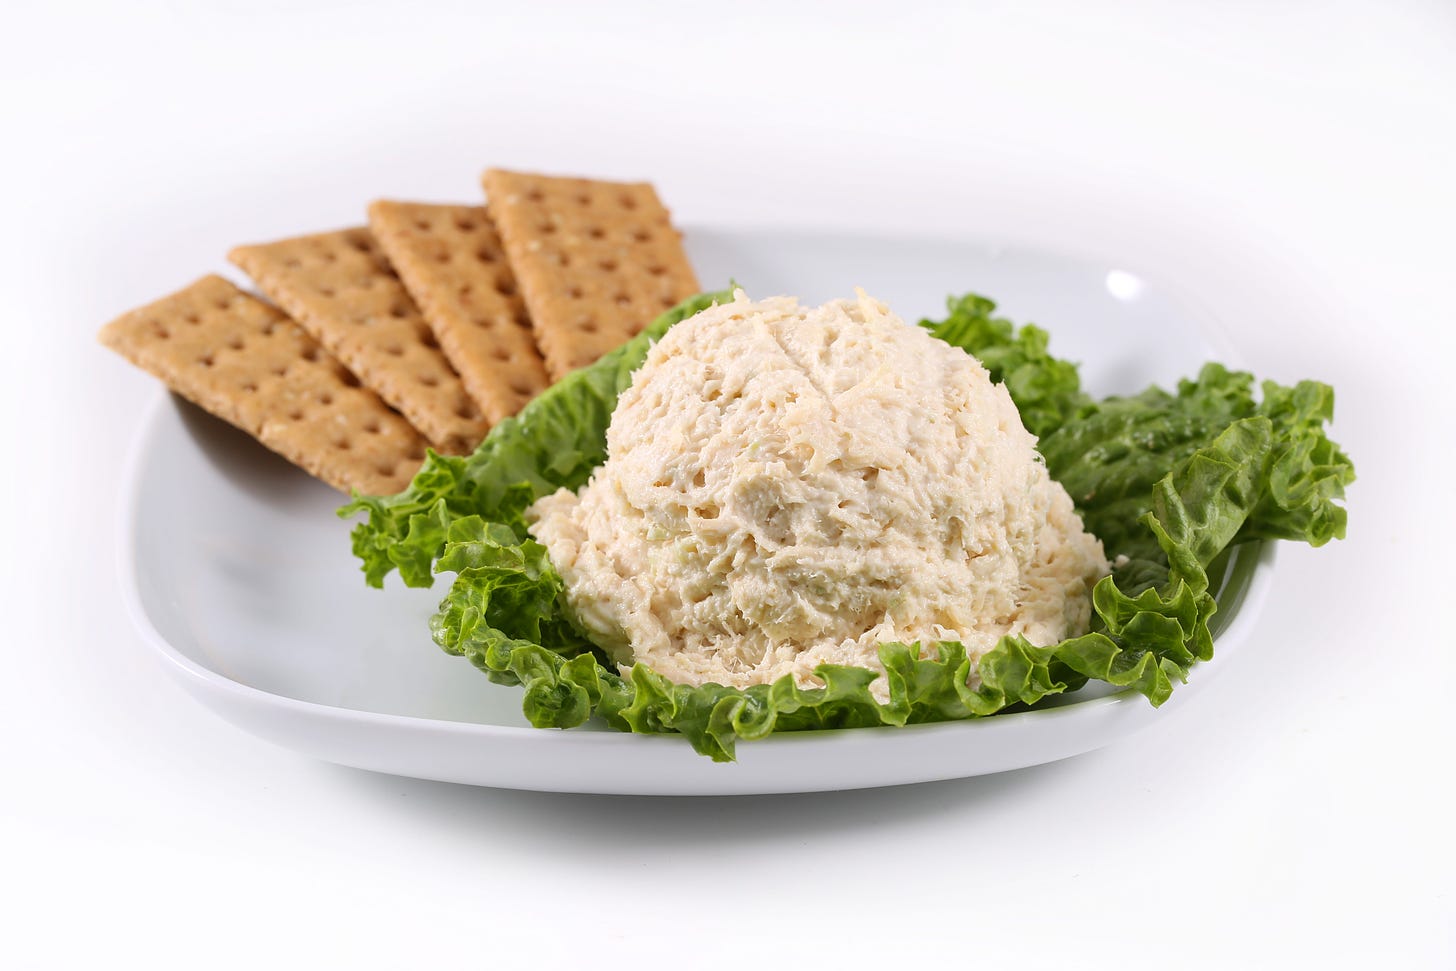 Chicken Salad Chick opening 4 Indianapolis-area restaurants